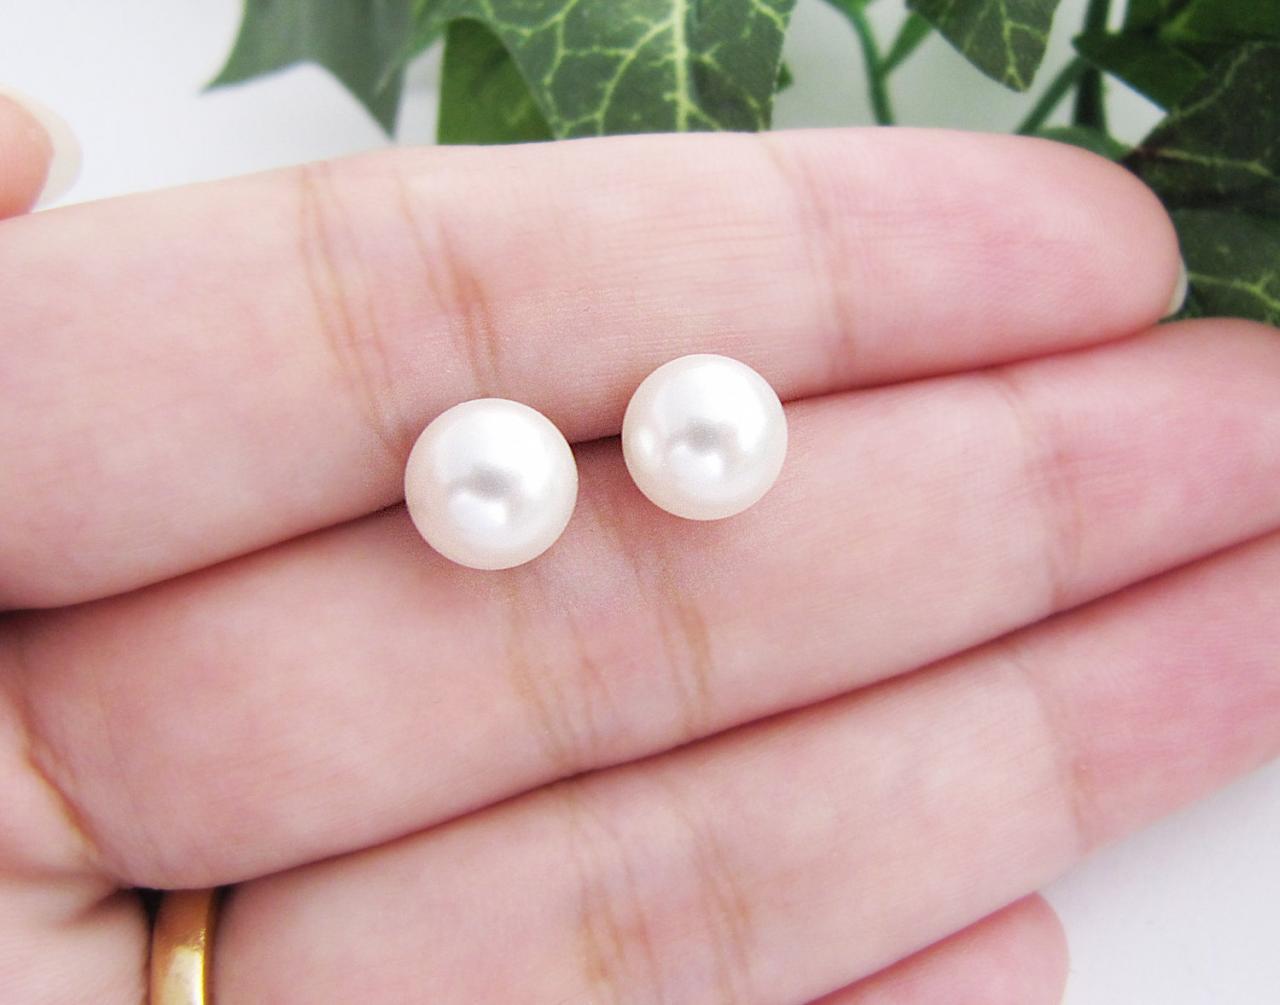 Wedding Jewelry Bridesmaid Jewelry Bridesmaid Earrings Crystal White 8mm Swarovski Pearls With Sterling Silver Ear Posts